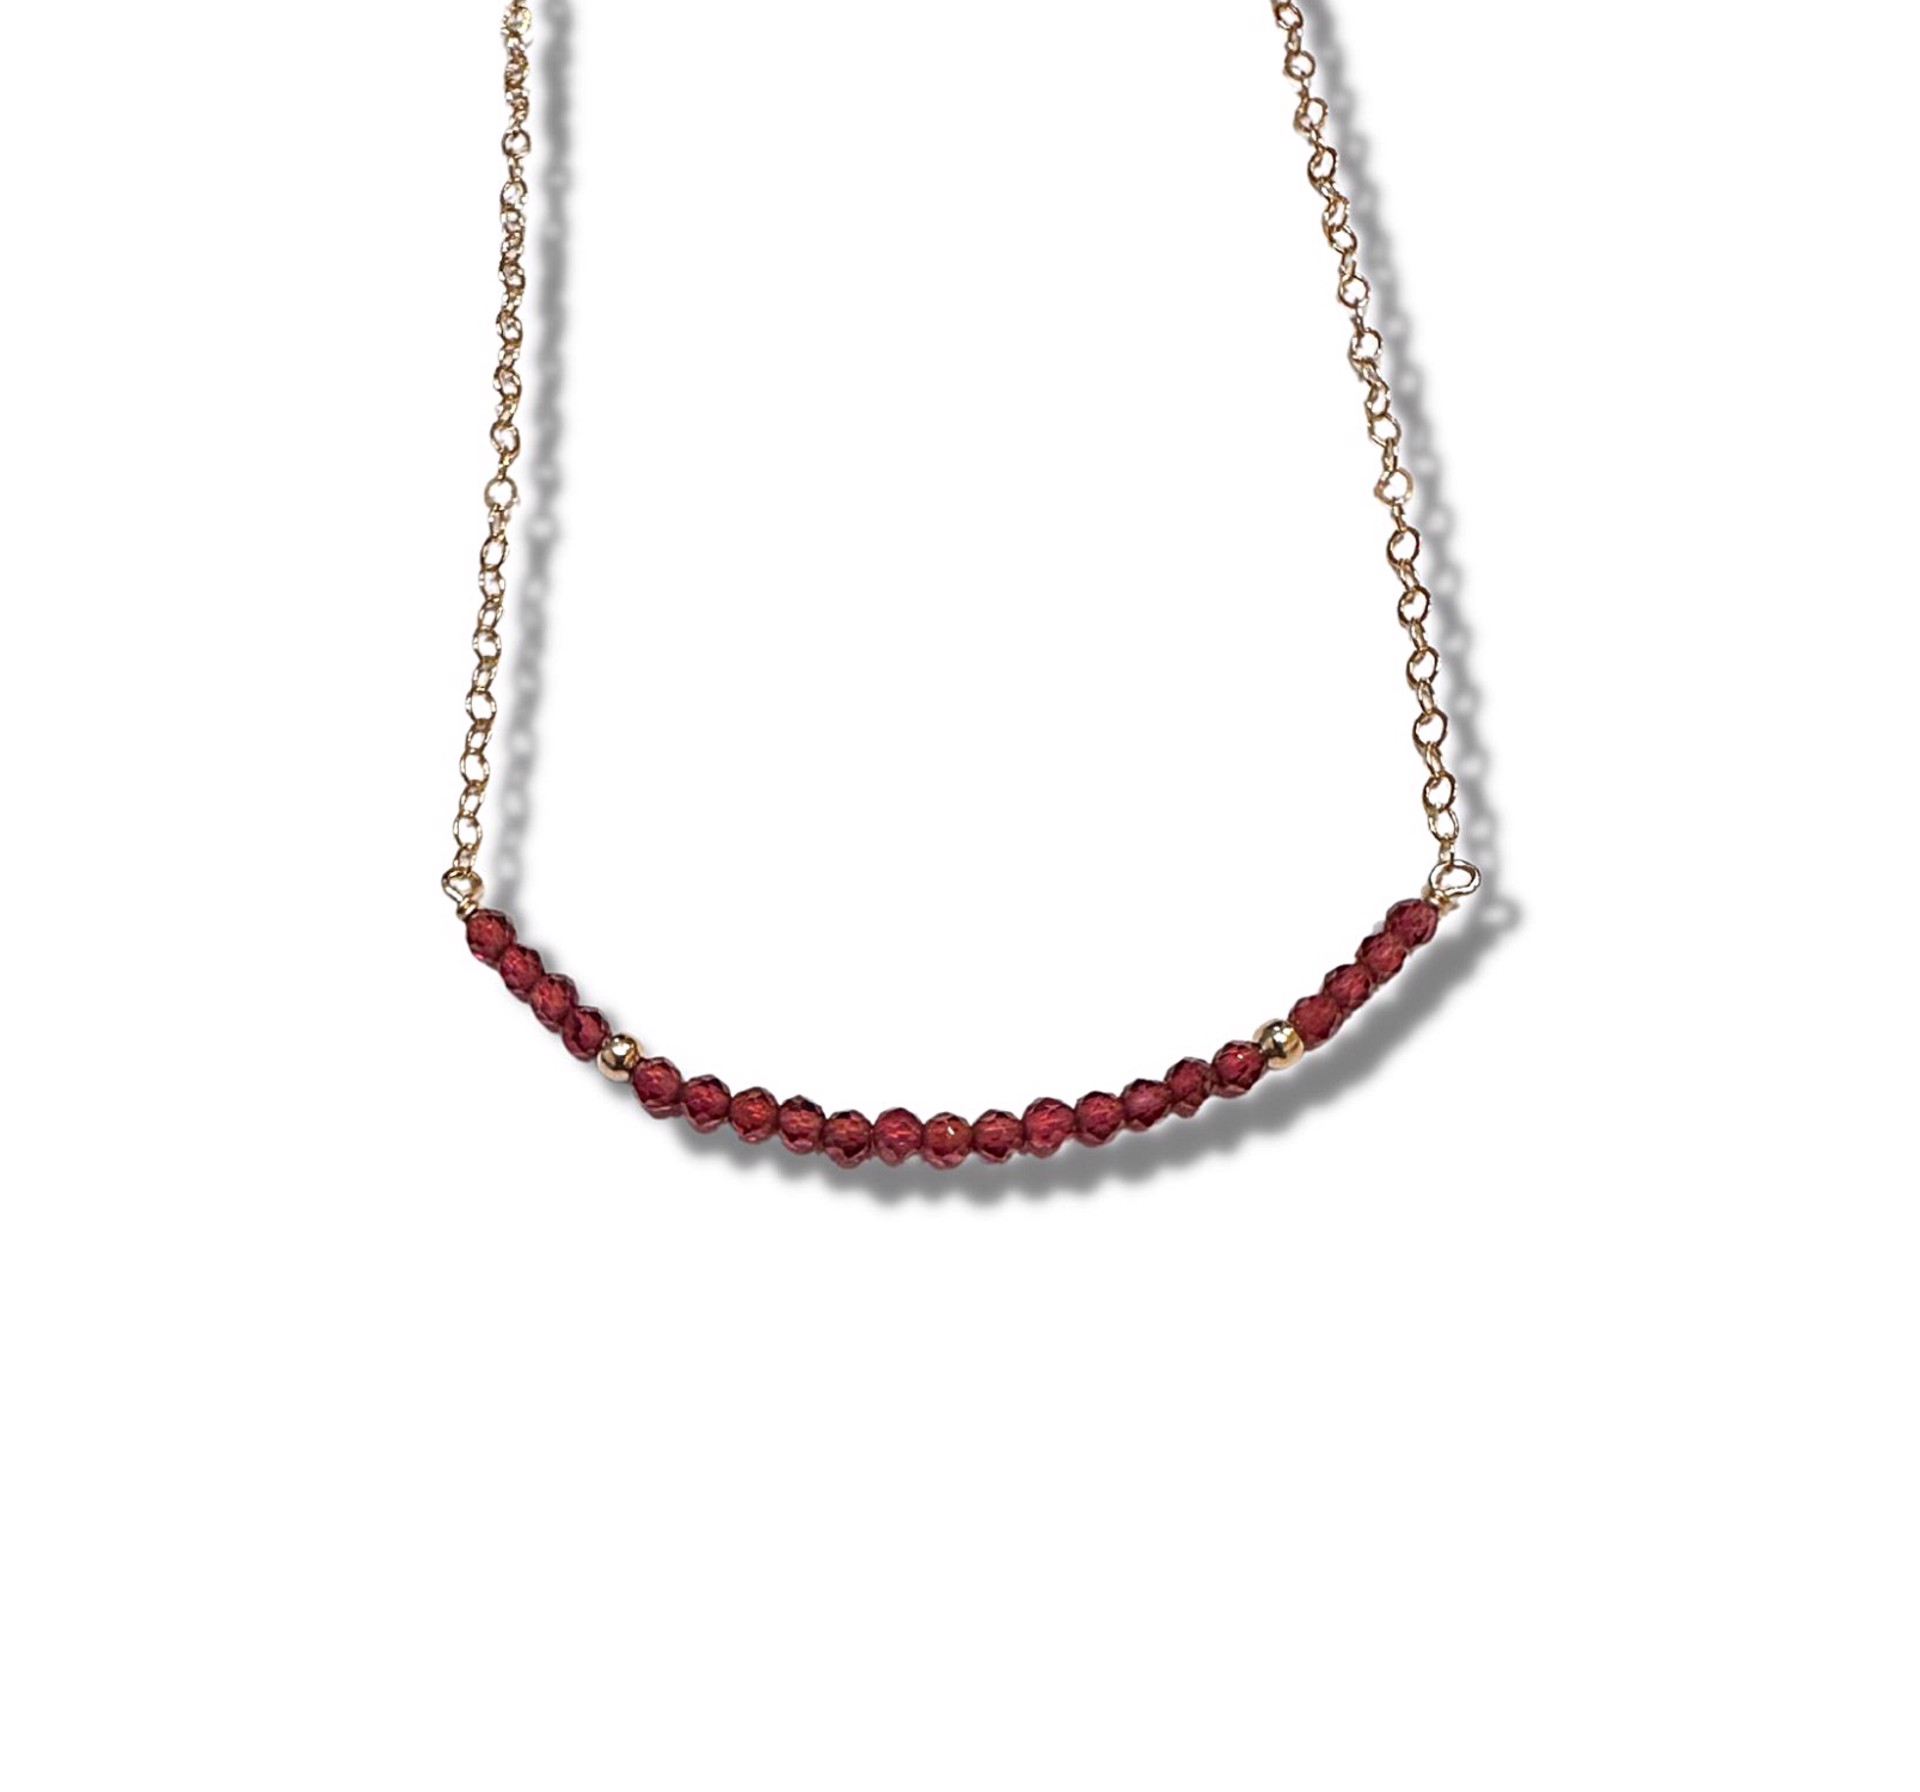 Necklace - Garnet with 14K Gold Filling by Julia Balestracci